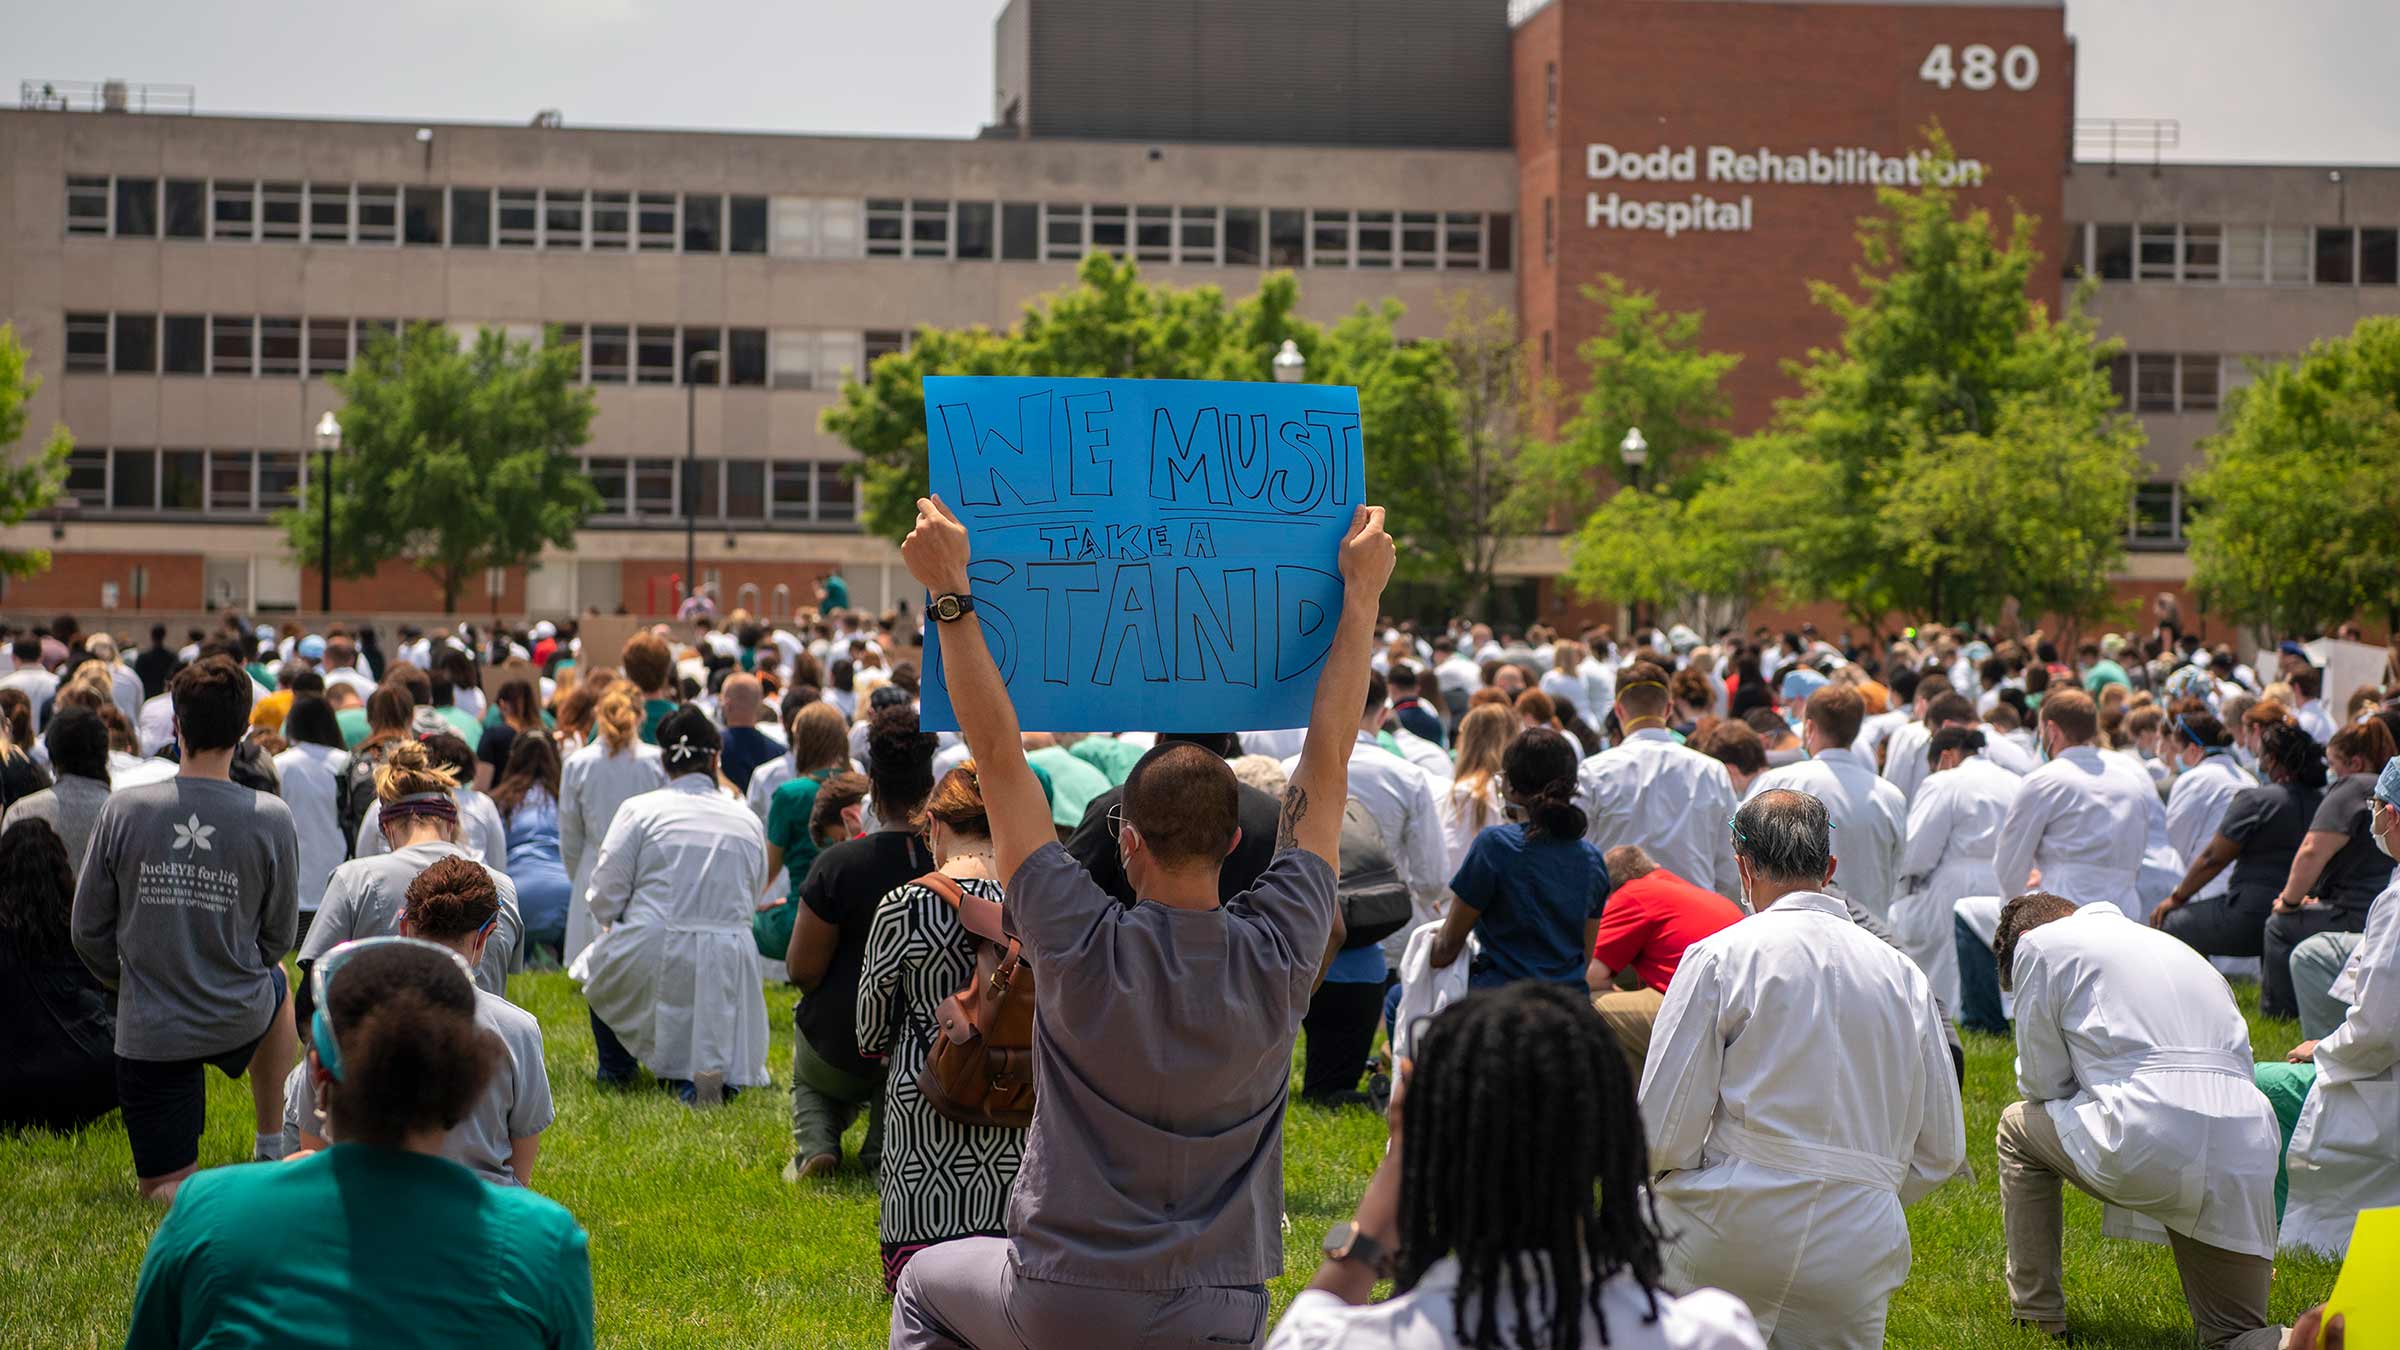 Building an increasingly anti-racist health care system benefiting Ohio State patients, staff and the community